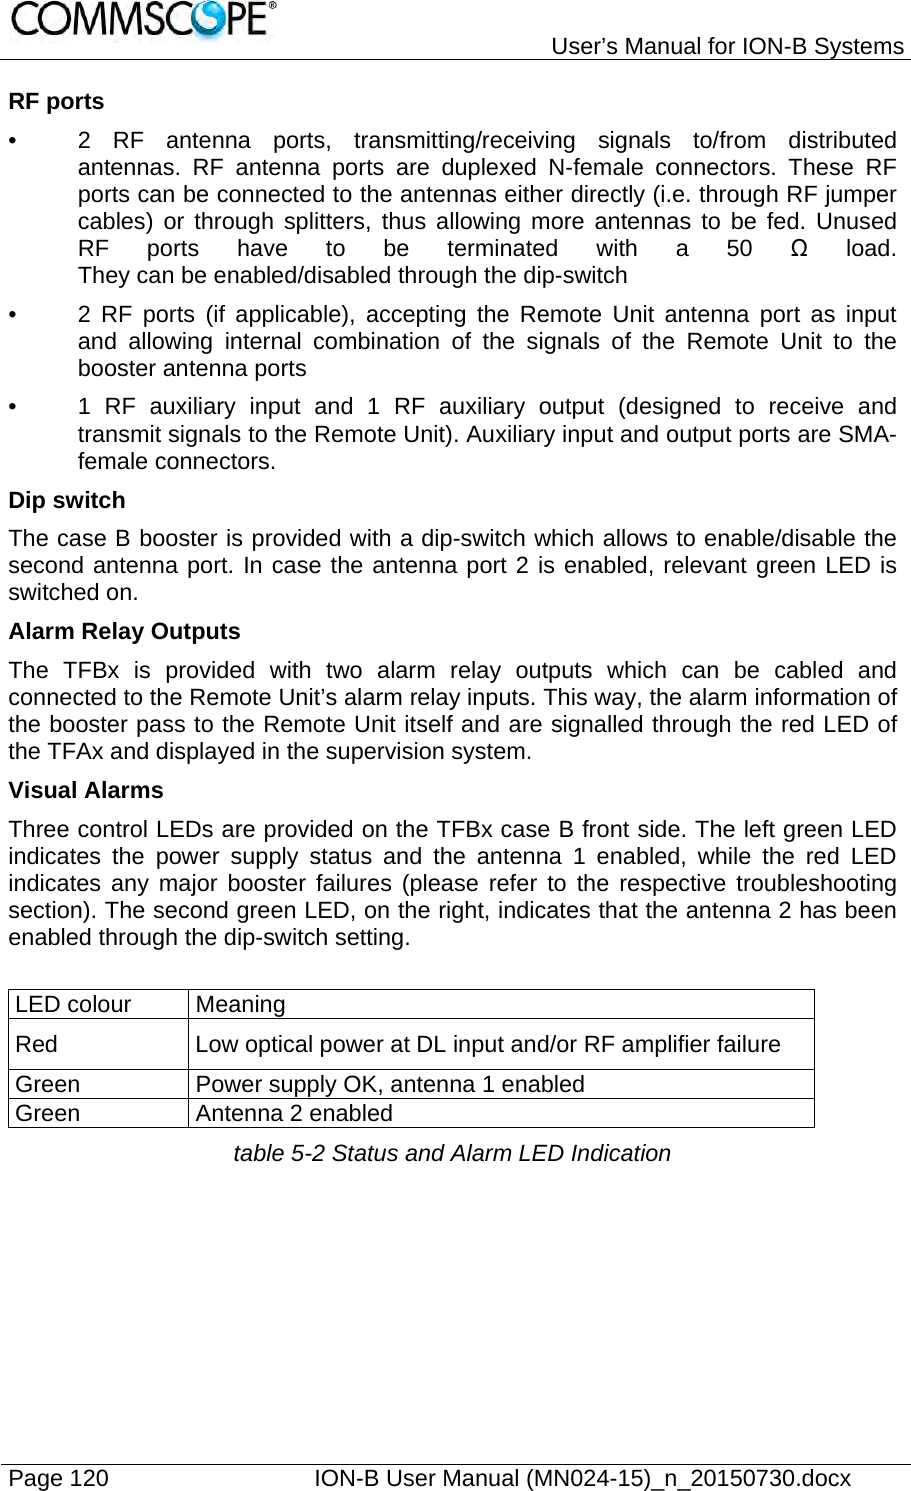   User’s Manual for ION-B Systems Page 120    ION-B User Manual (MN024-15)_n_20150730.docx  RF ports •  2 RF antenna ports, transmitting/receiving signals to/from distributed antennas. RF antenna ports are duplexed N-female connectors. These RF ports can be connected to the antennas either directly (i.e. through RF jumper cables) or through splitters, thus allowing more antennas to be fed. Unused RF ports have to be terminated with a 50 Ω load. They can be enabled/disabled through the dip-switch •  2 RF ports (if applicable), accepting the Remote Unit antenna port as input and allowing internal combination of the signals of the Remote Unit to the booster antenna ports •  1 RF auxiliary input and 1 RF auxiliary output (designed to receive and transmit signals to the Remote Unit). Auxiliary input and output ports are SMA-female connectors. Dip switch The case B booster is provided with a dip-switch which allows to enable/disable the second antenna port. In case the antenna port 2 is enabled, relevant green LED is switched on. Alarm Relay Outputs The TFBx is provided with two alarm relay outputs which can be cabled and connected to the Remote Unit’s alarm relay inputs. This way, the alarm information of the booster pass to the Remote Unit itself and are signalled through the red LED of the TFAx and displayed in the supervision system. Visual Alarms Three control LEDs are provided on the TFBx case B front side. The left green LED indicates the power supply status and the antenna 1 enabled, while the red LED indicates any major booster failures (please refer to the respective troubleshooting section). The second green LED, on the right, indicates that the antenna 2 has been enabled through the dip-switch setting.  LED colour  Meaning Red  Low optical power at DL input and/or RF amplifier failure Green  Power supply OK, antenna 1 enabled Green Antenna 2 enabled table 5-2 Status and Alarm LED Indication  